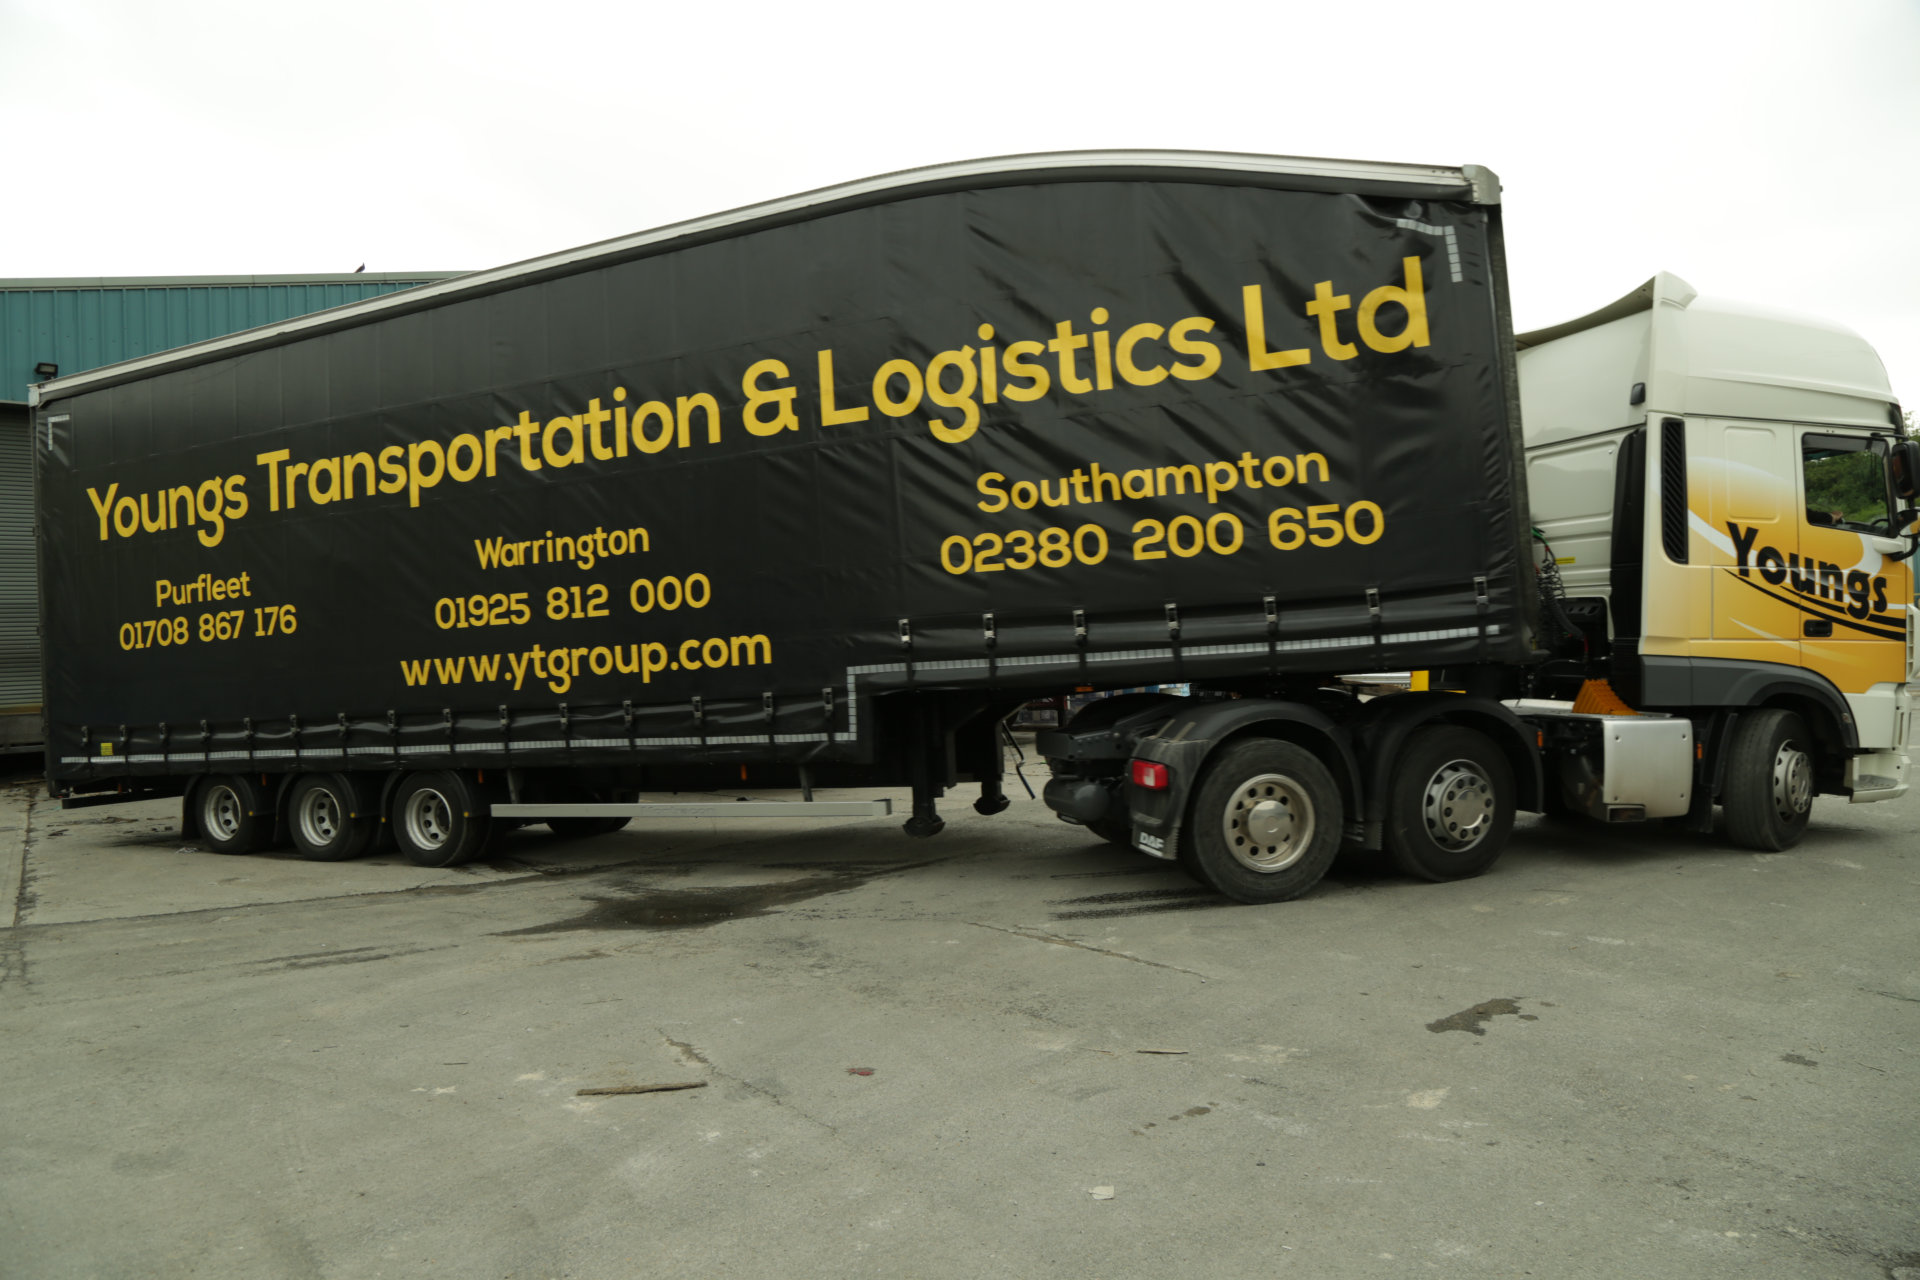 Transport Services -  Youngs Transport & Logistics